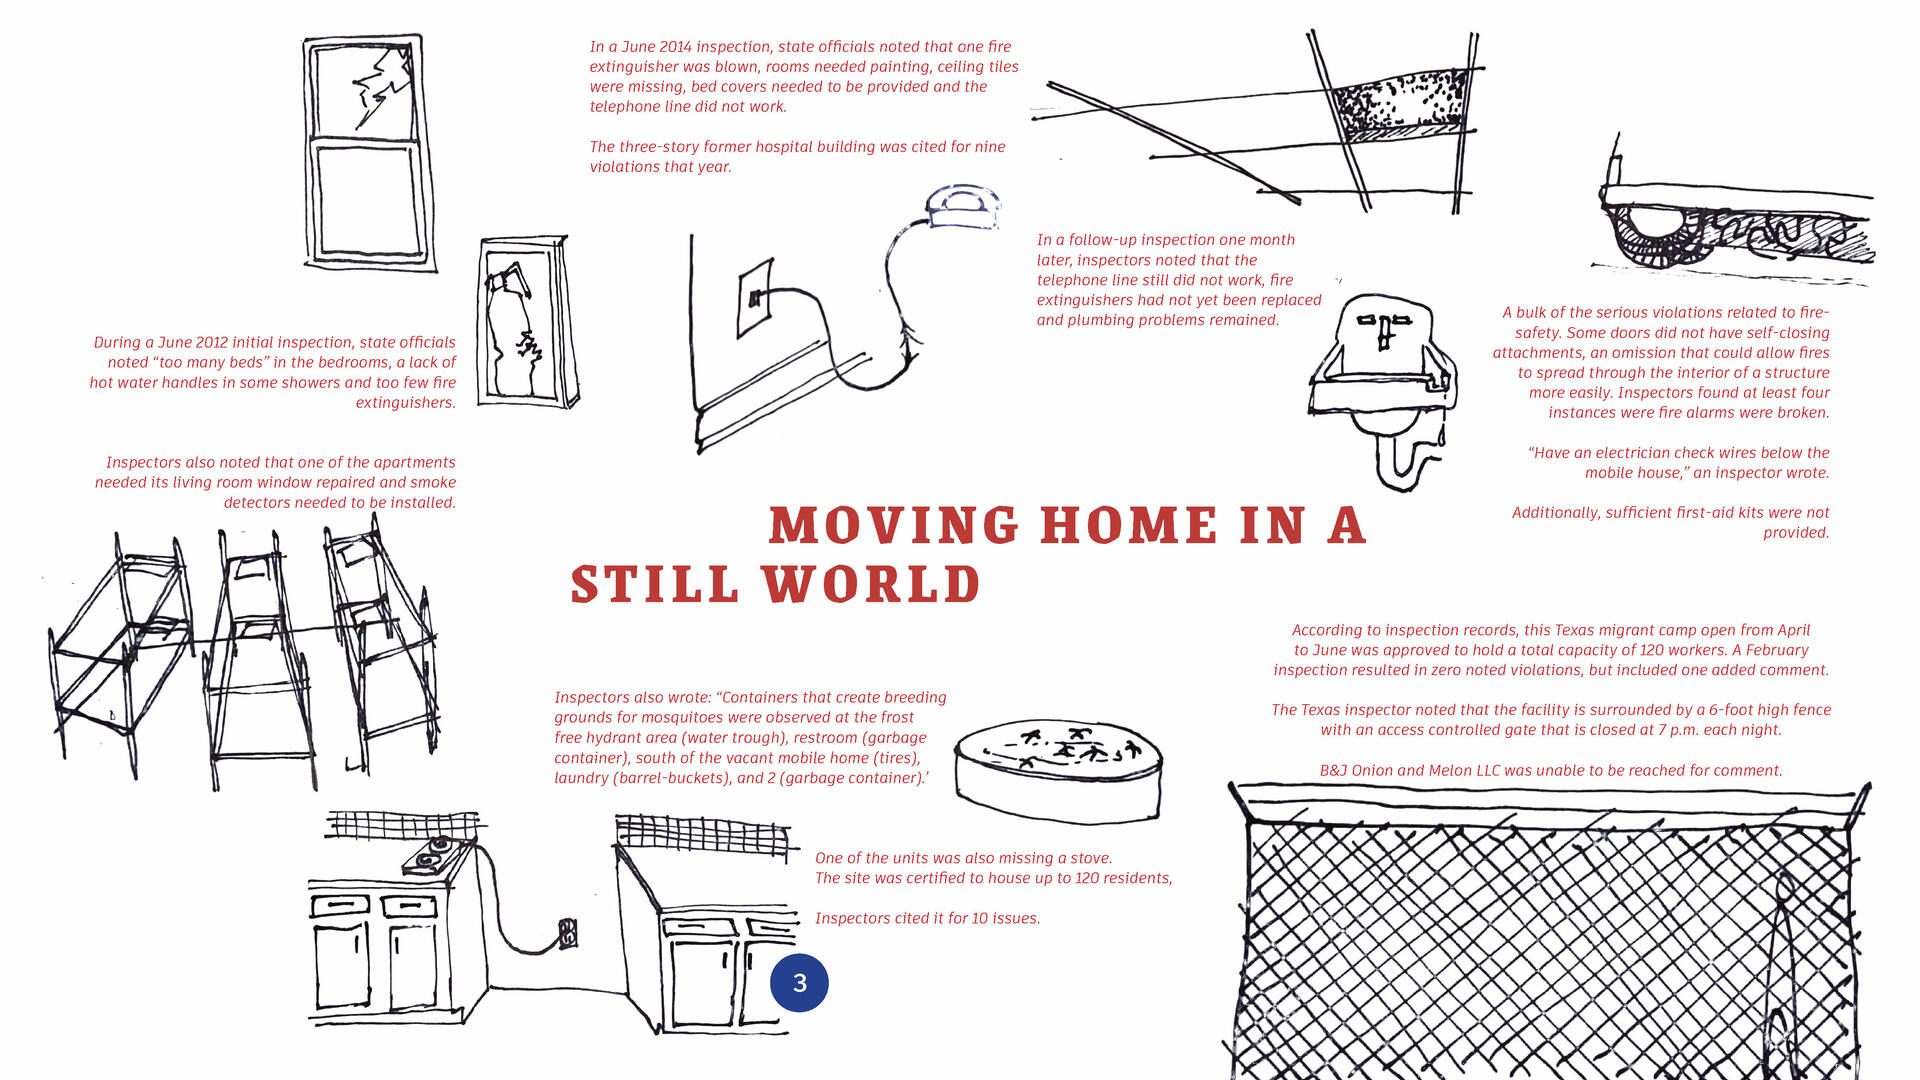 This page was intended to visualize the suffering that the people and the spaces involved in this hardship go through. We ask a lot of them, we give them nothing. By simplifying the abstract concept of an inspection catalogue to a first-person blurry home visit, we feel the pain as if we live there, as if we know the people who do.